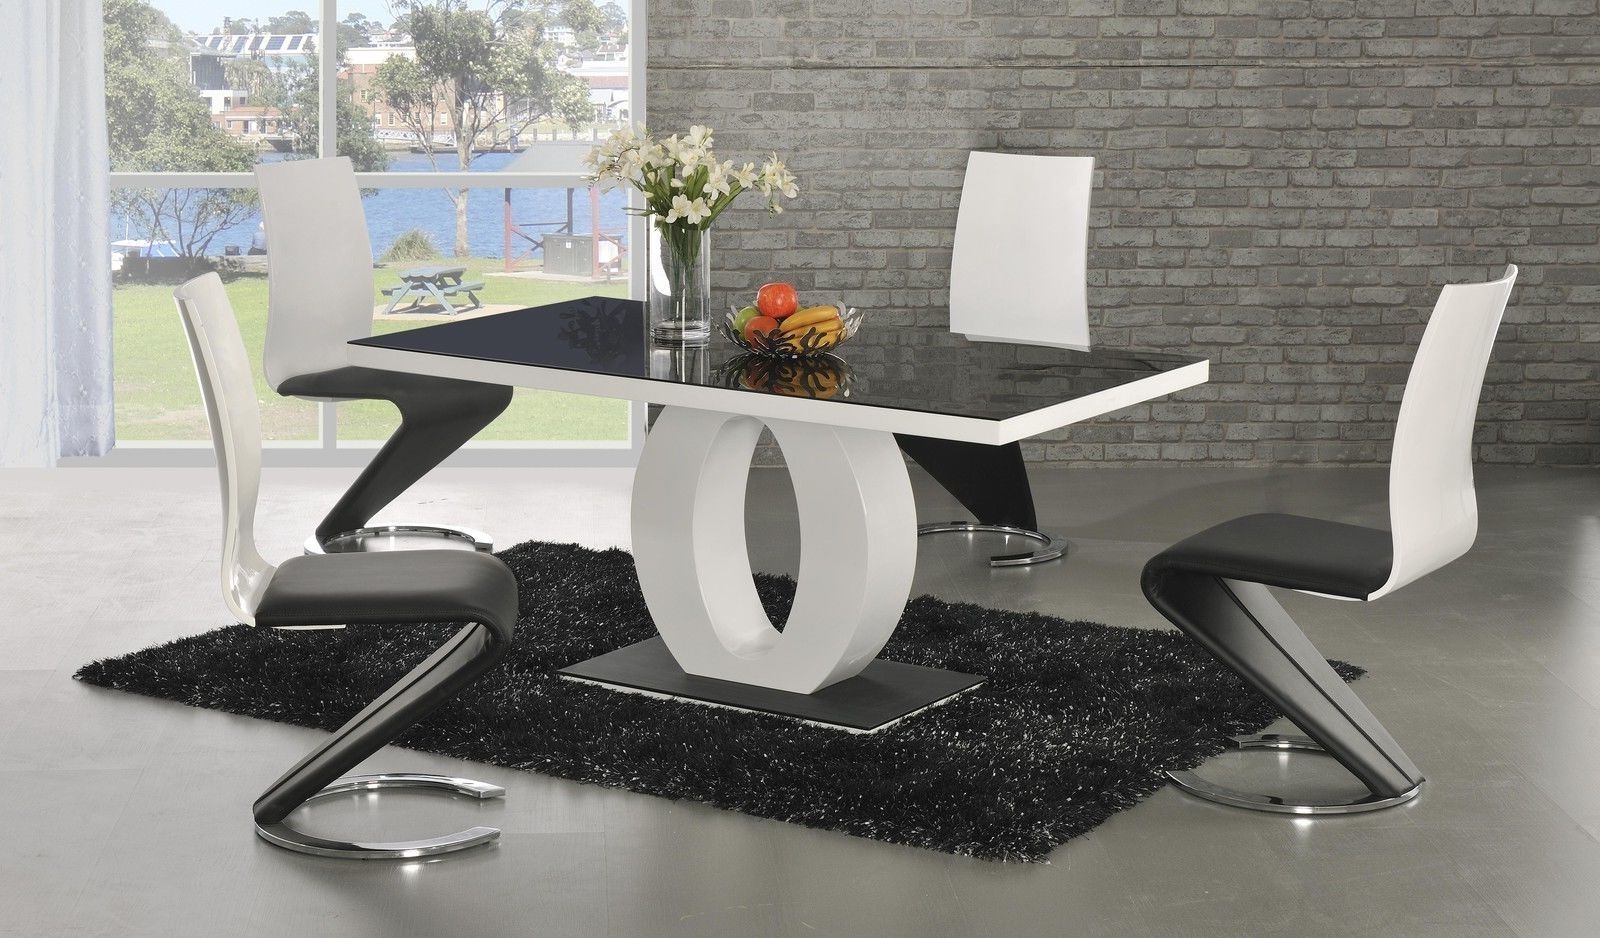 Ga Angel Black Glass White Gloss 160 Cm Designer Dining Set 4 / 6 Z Swish  Chairs Within Latest Black Gloss Dining Tables And Chairs (View 5 of 25)